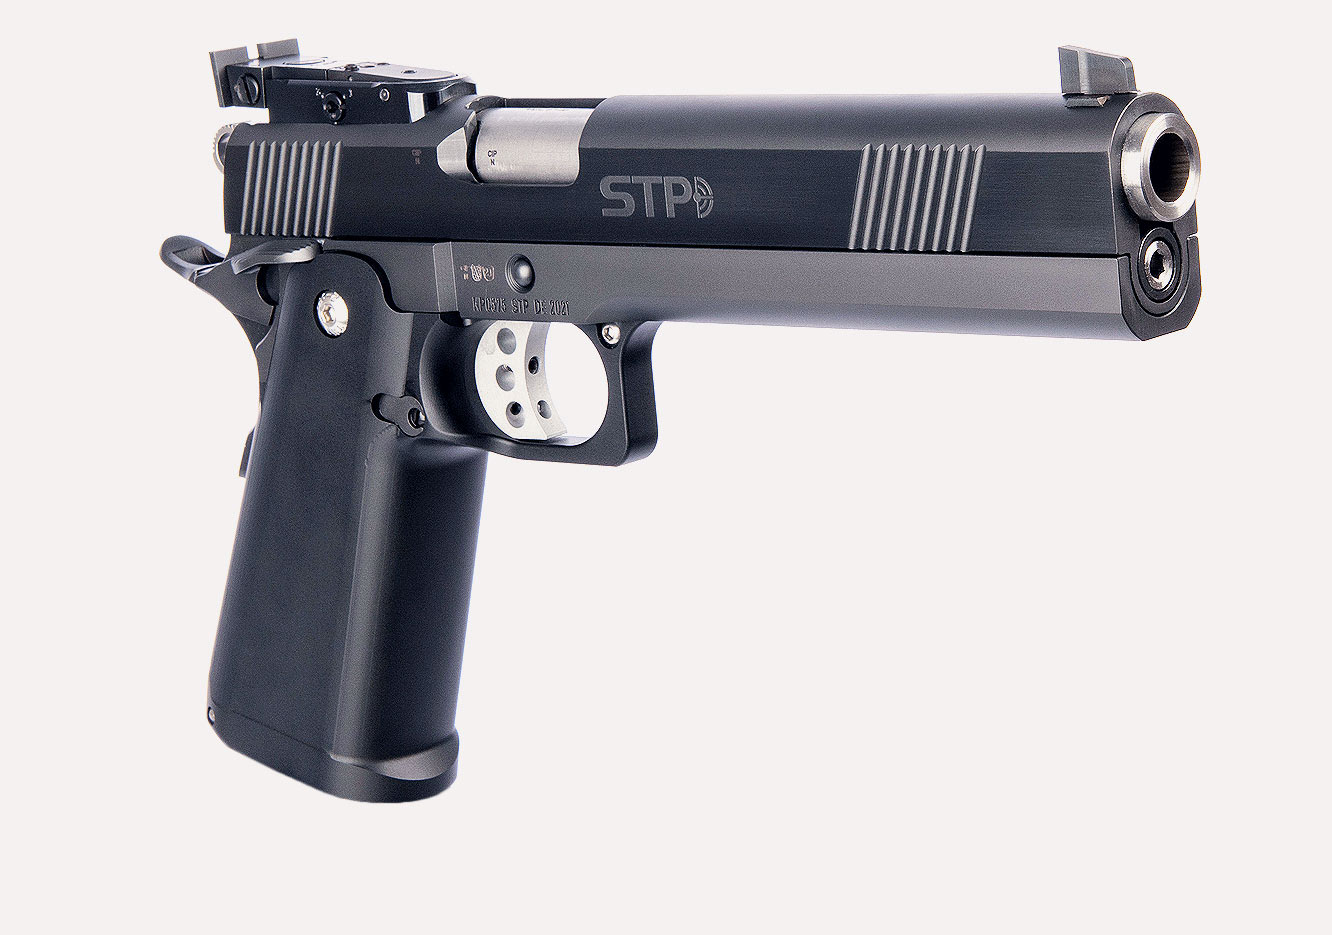 Igel Aristo/Bomar 6.0 · STP by Prommersberger · Premium weapons · Top  sports guns